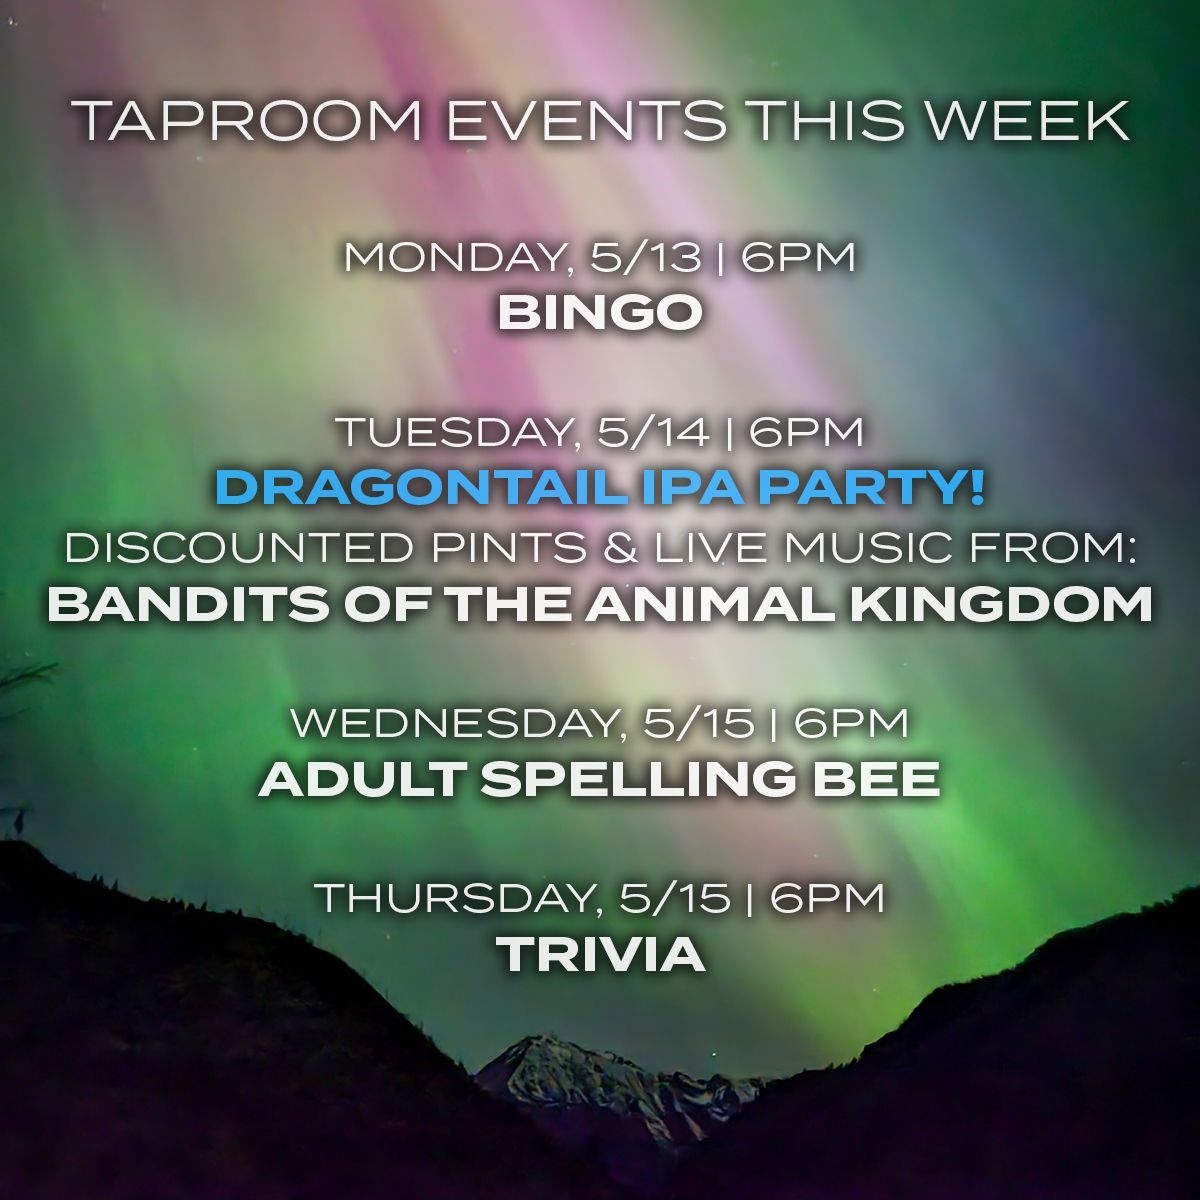 Events this week at our taproom: Bingo, Dragontail Party, Spelling Bee and Trivia! See you soon!